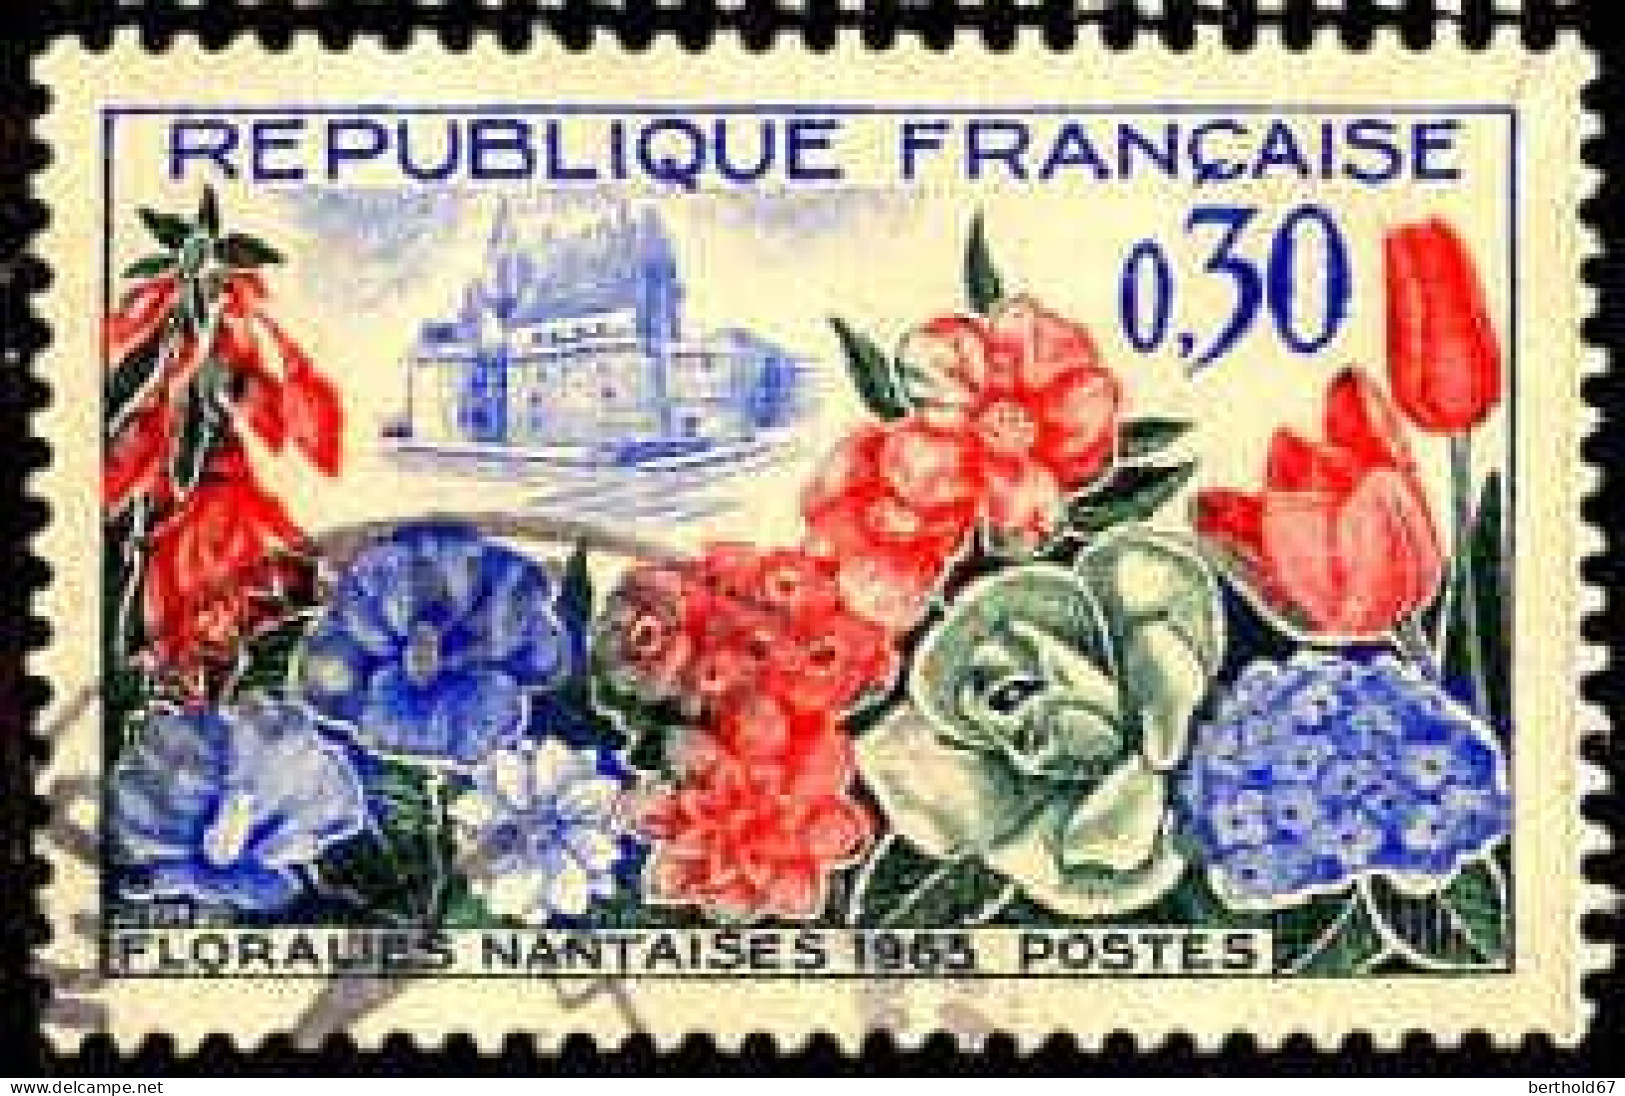 France Poste Obl Yv:1369 Mi:1422 Floralies Nantaises (TB Cachet Rond) - Used Stamps